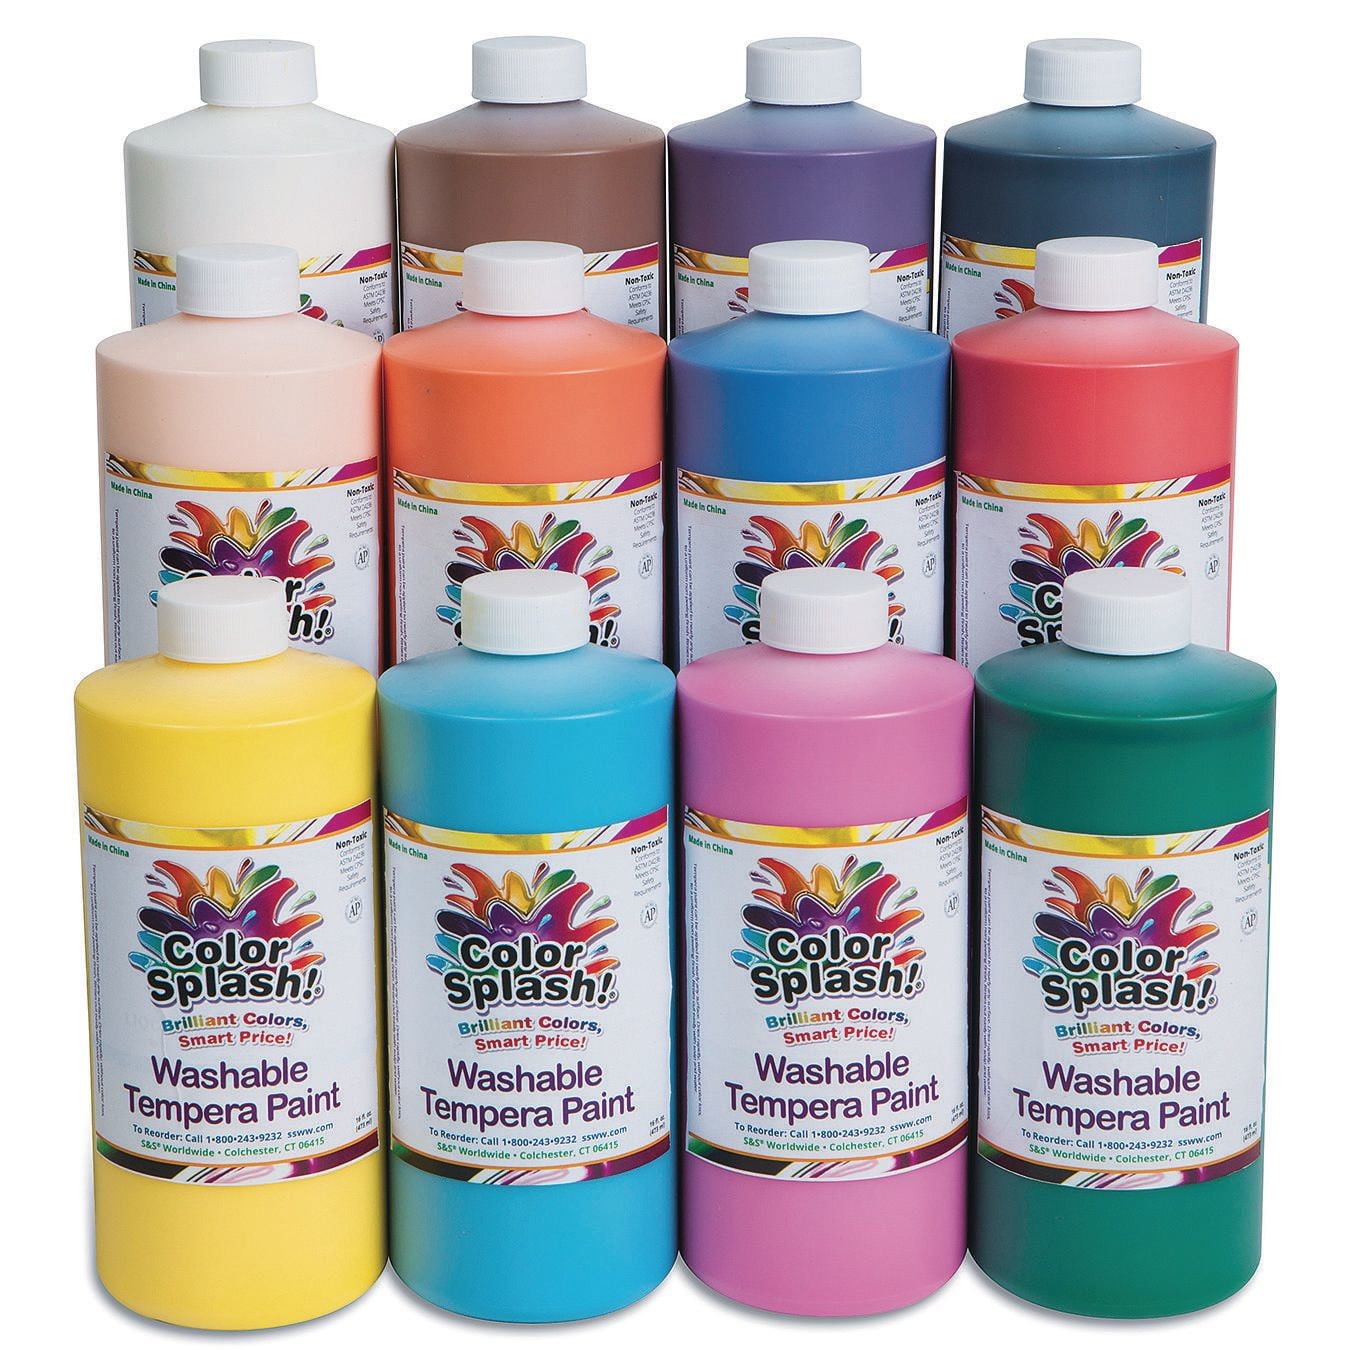 40 x 60ml Washable Tempera Paint for Kids and Toddlers, Liquid